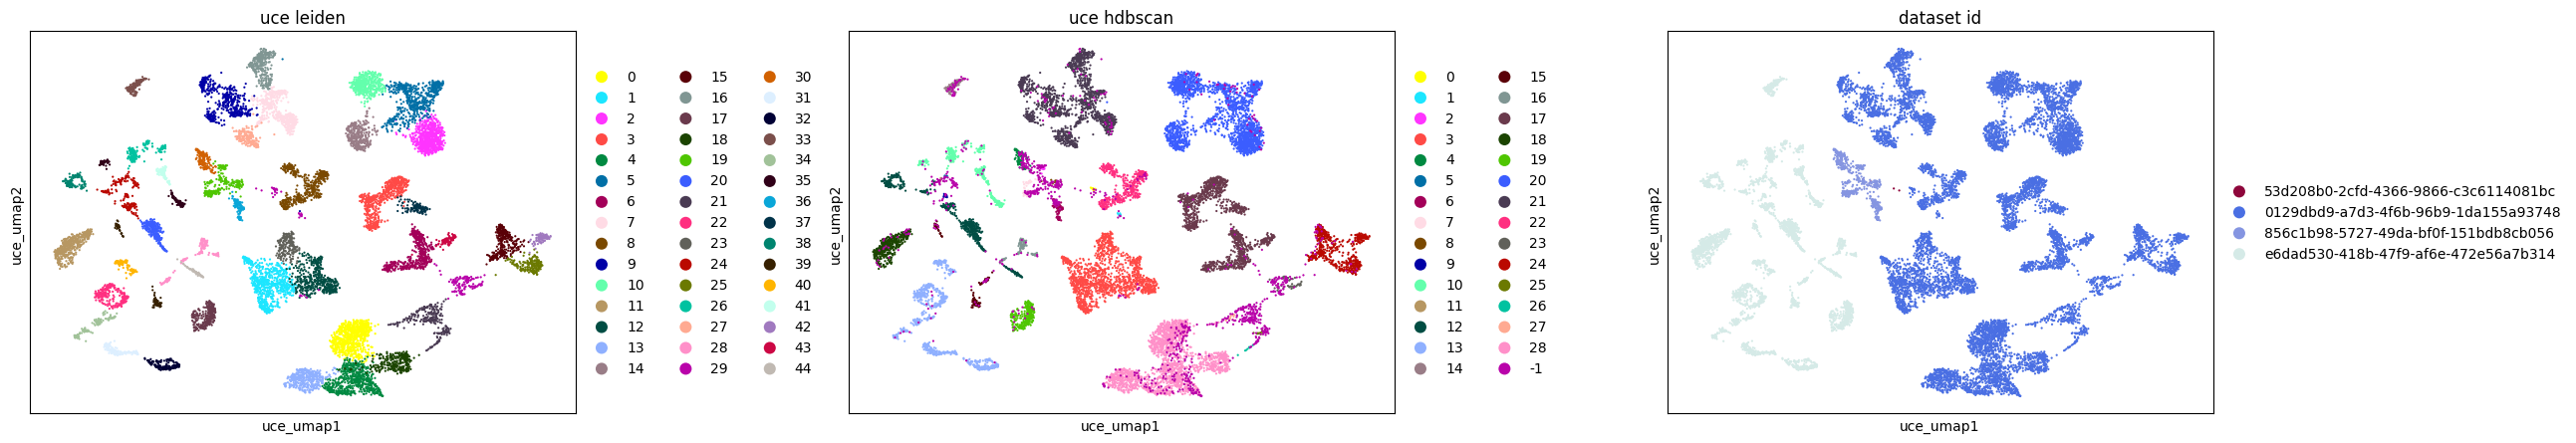 ../../_images/notebooks_analysis_demo_comp_bio_embedding_exploration_11_7.png